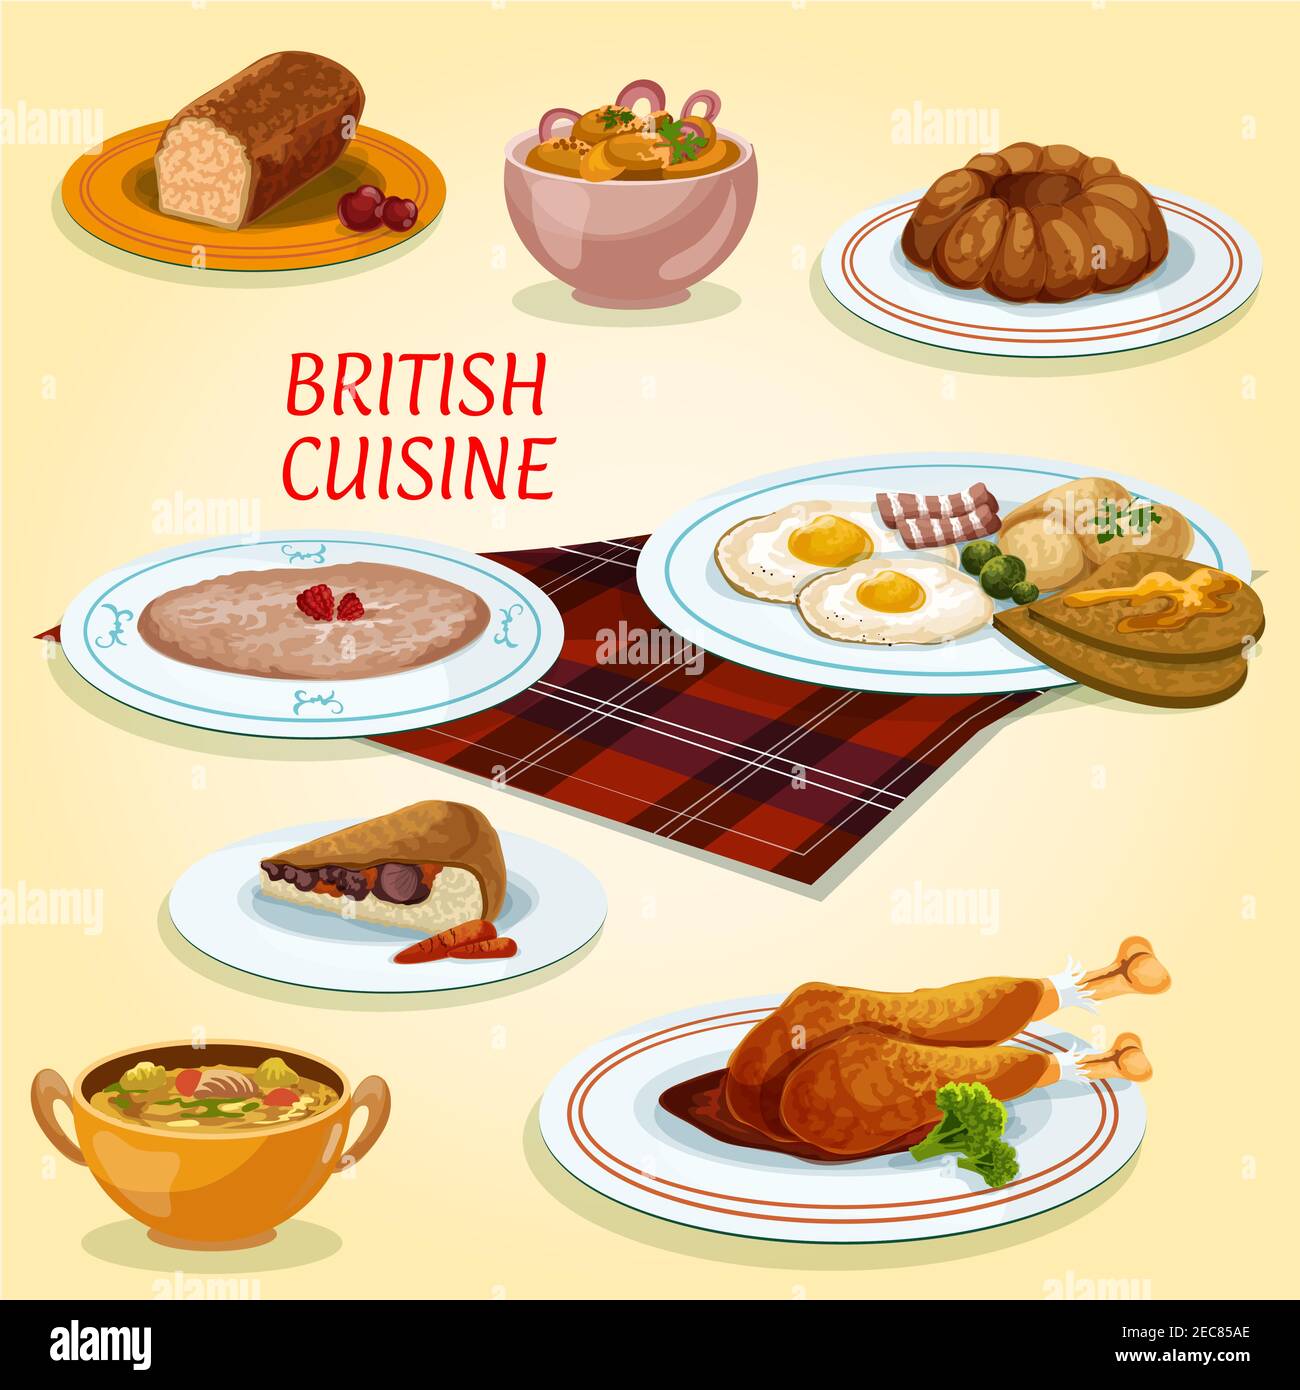 British cuisine icon with fried eggs and bacon, steak and kidney pie, turkey with cranberry sauce, pudding, oatmeal porridge, gingerbread cake, scotti Stock Vector